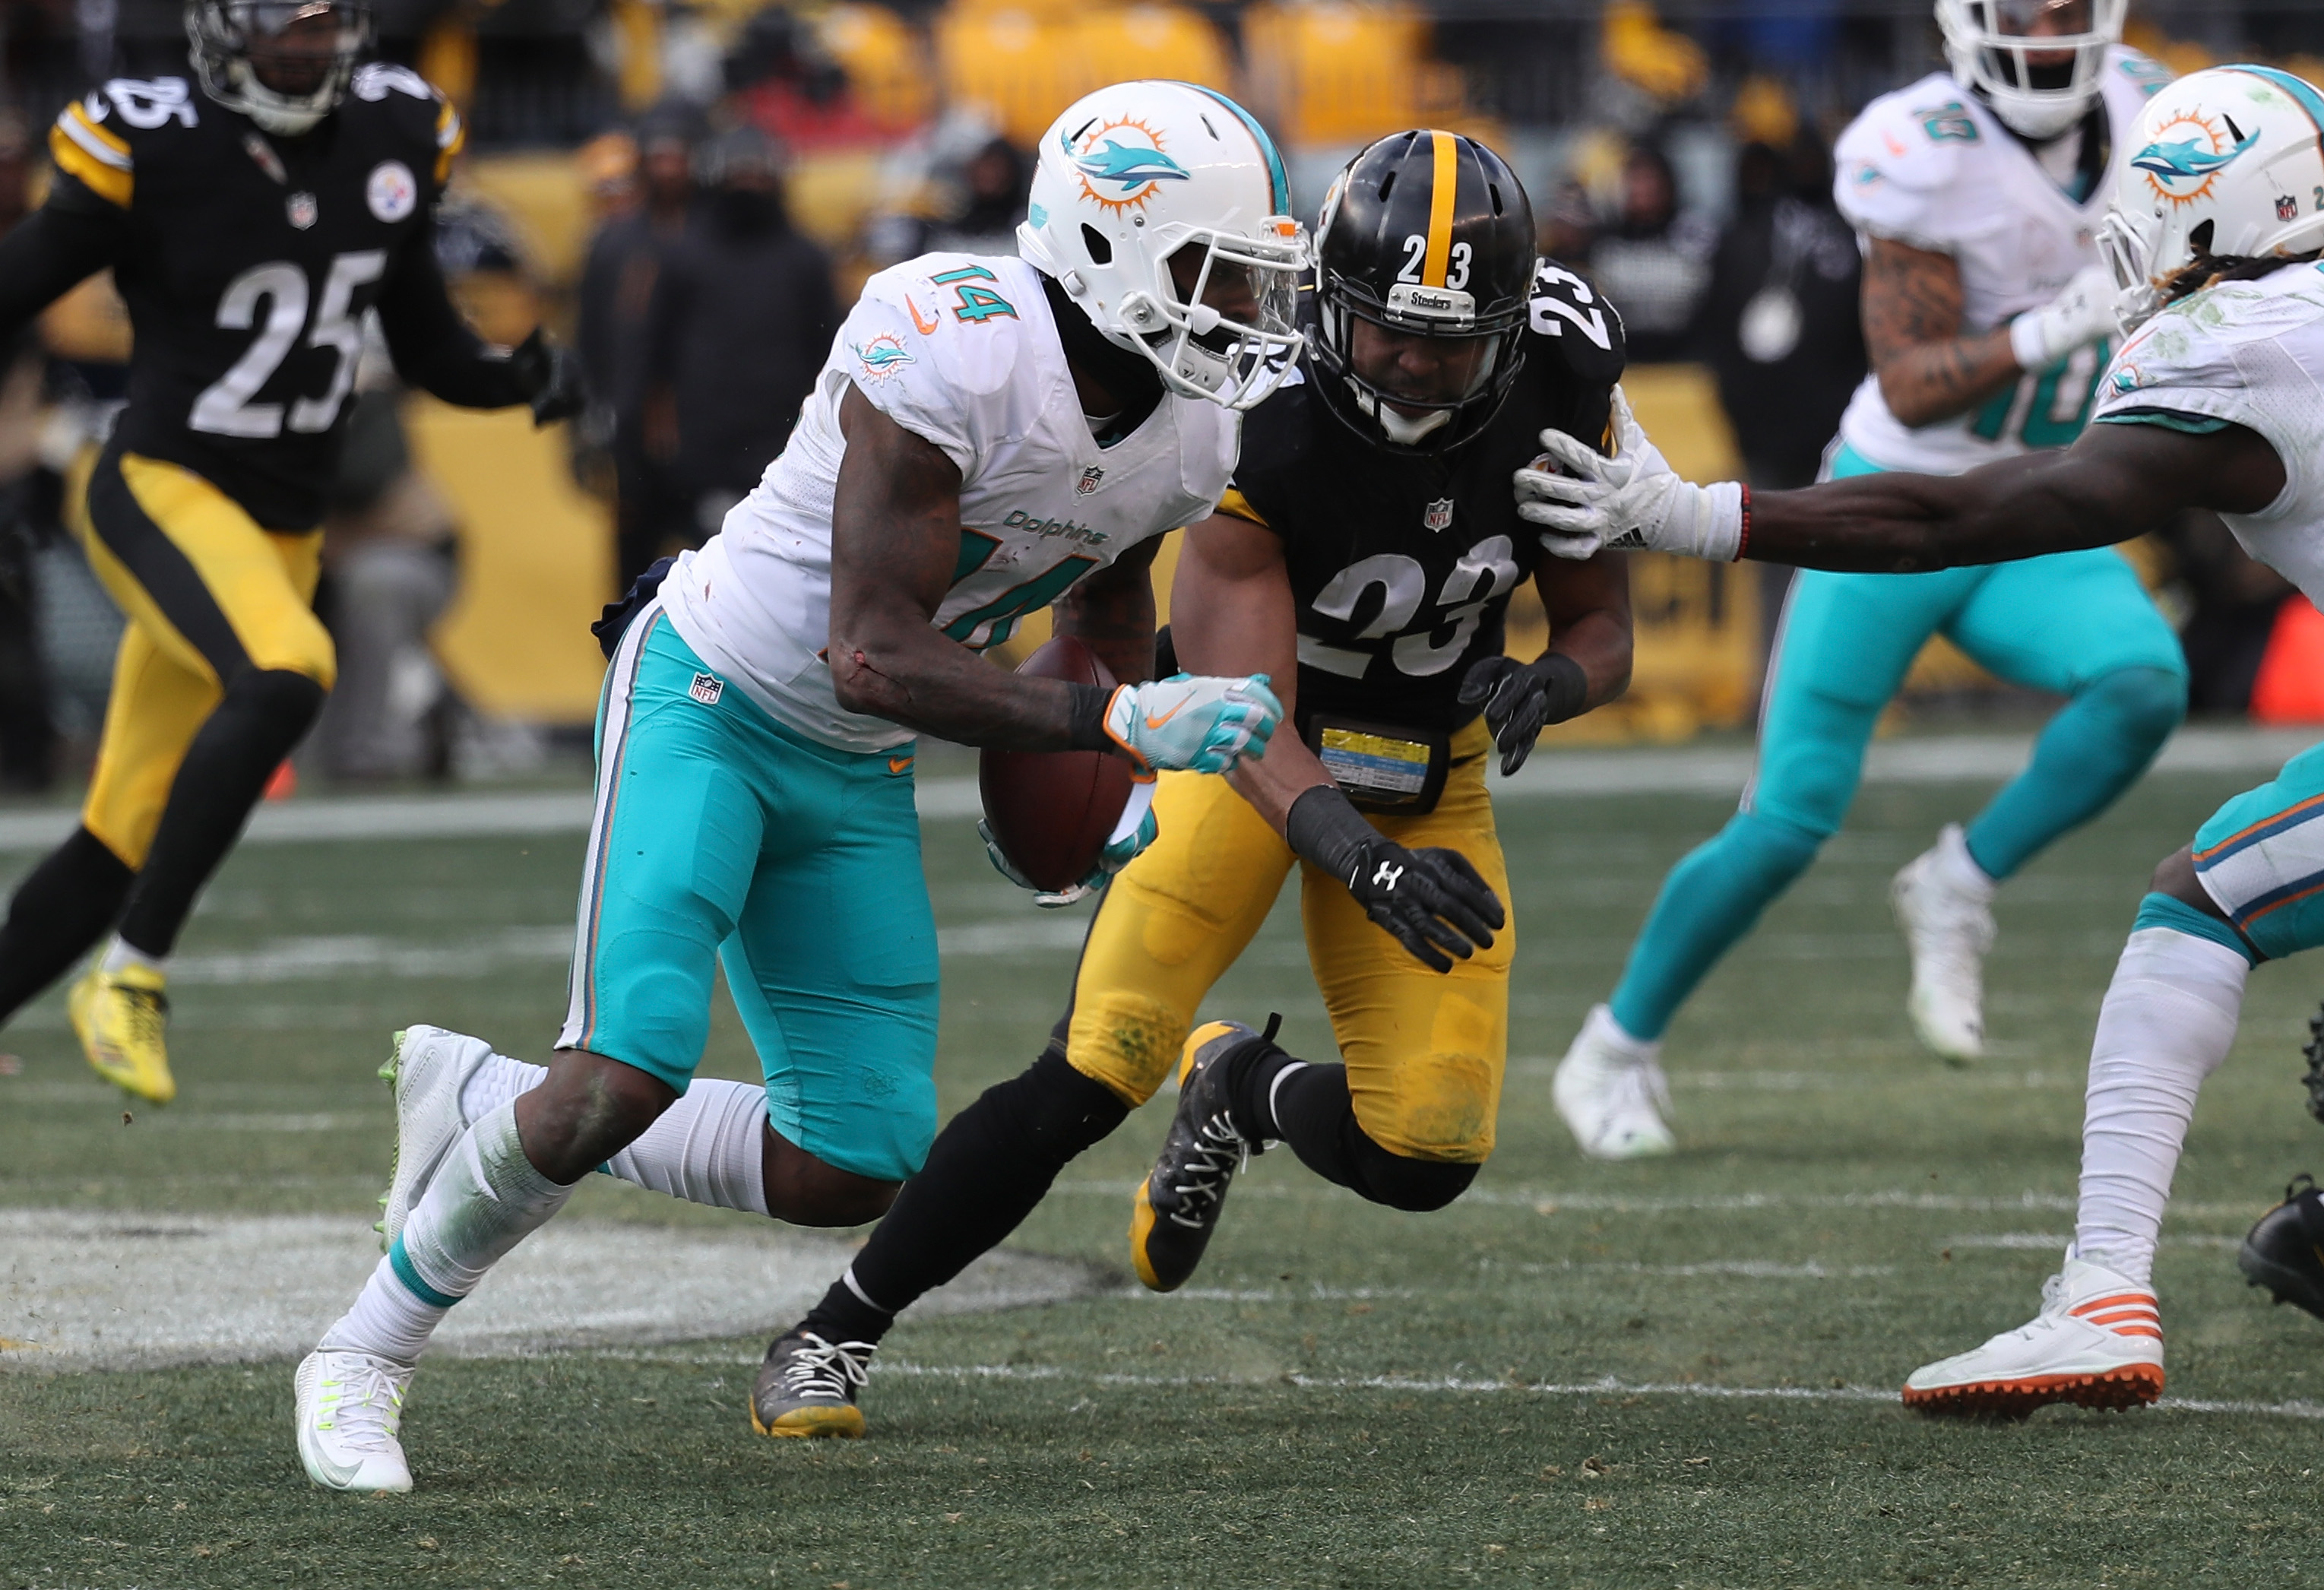 Steelers defeat Dolphins 30-12